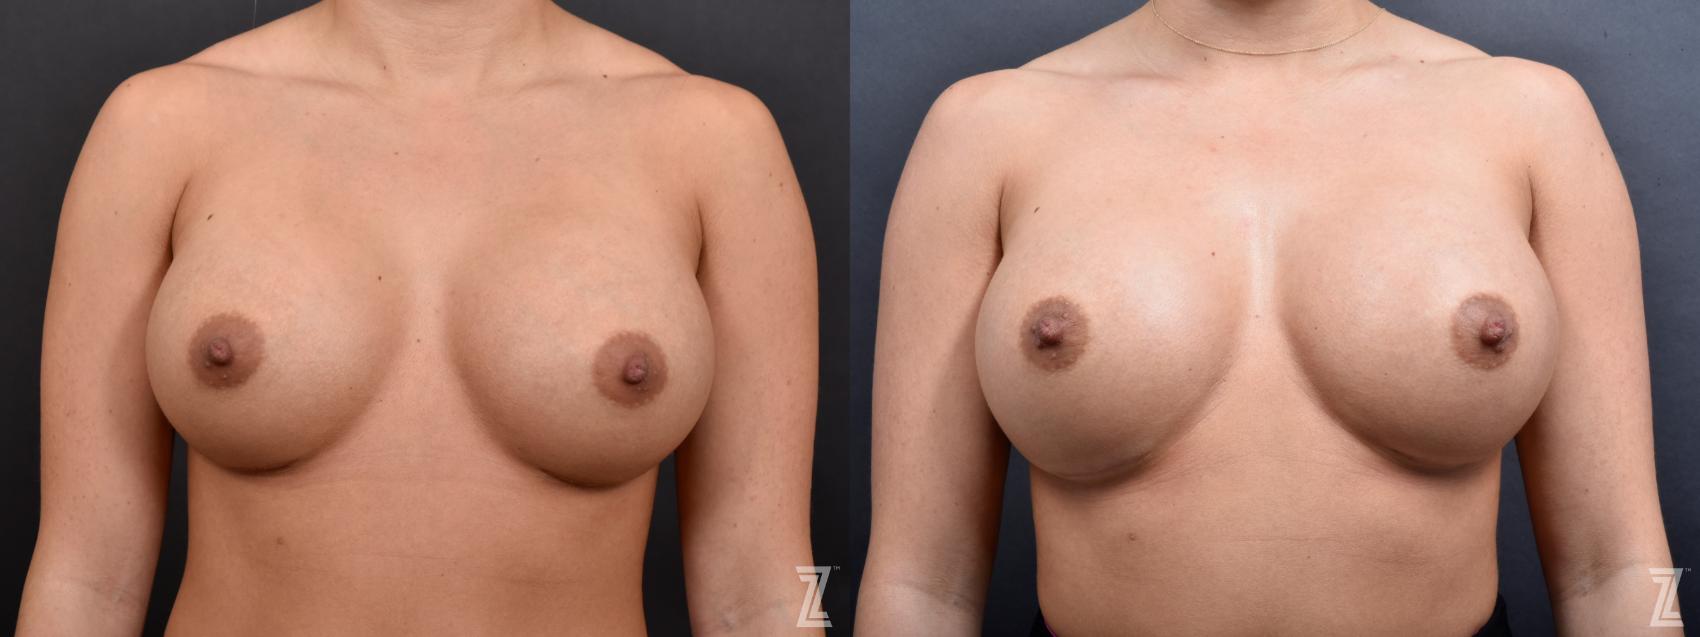 Fat Transfer Before & After Photo | Austin, TX | The Piazza Center for Plastic Surgery & Advanced Skin Care